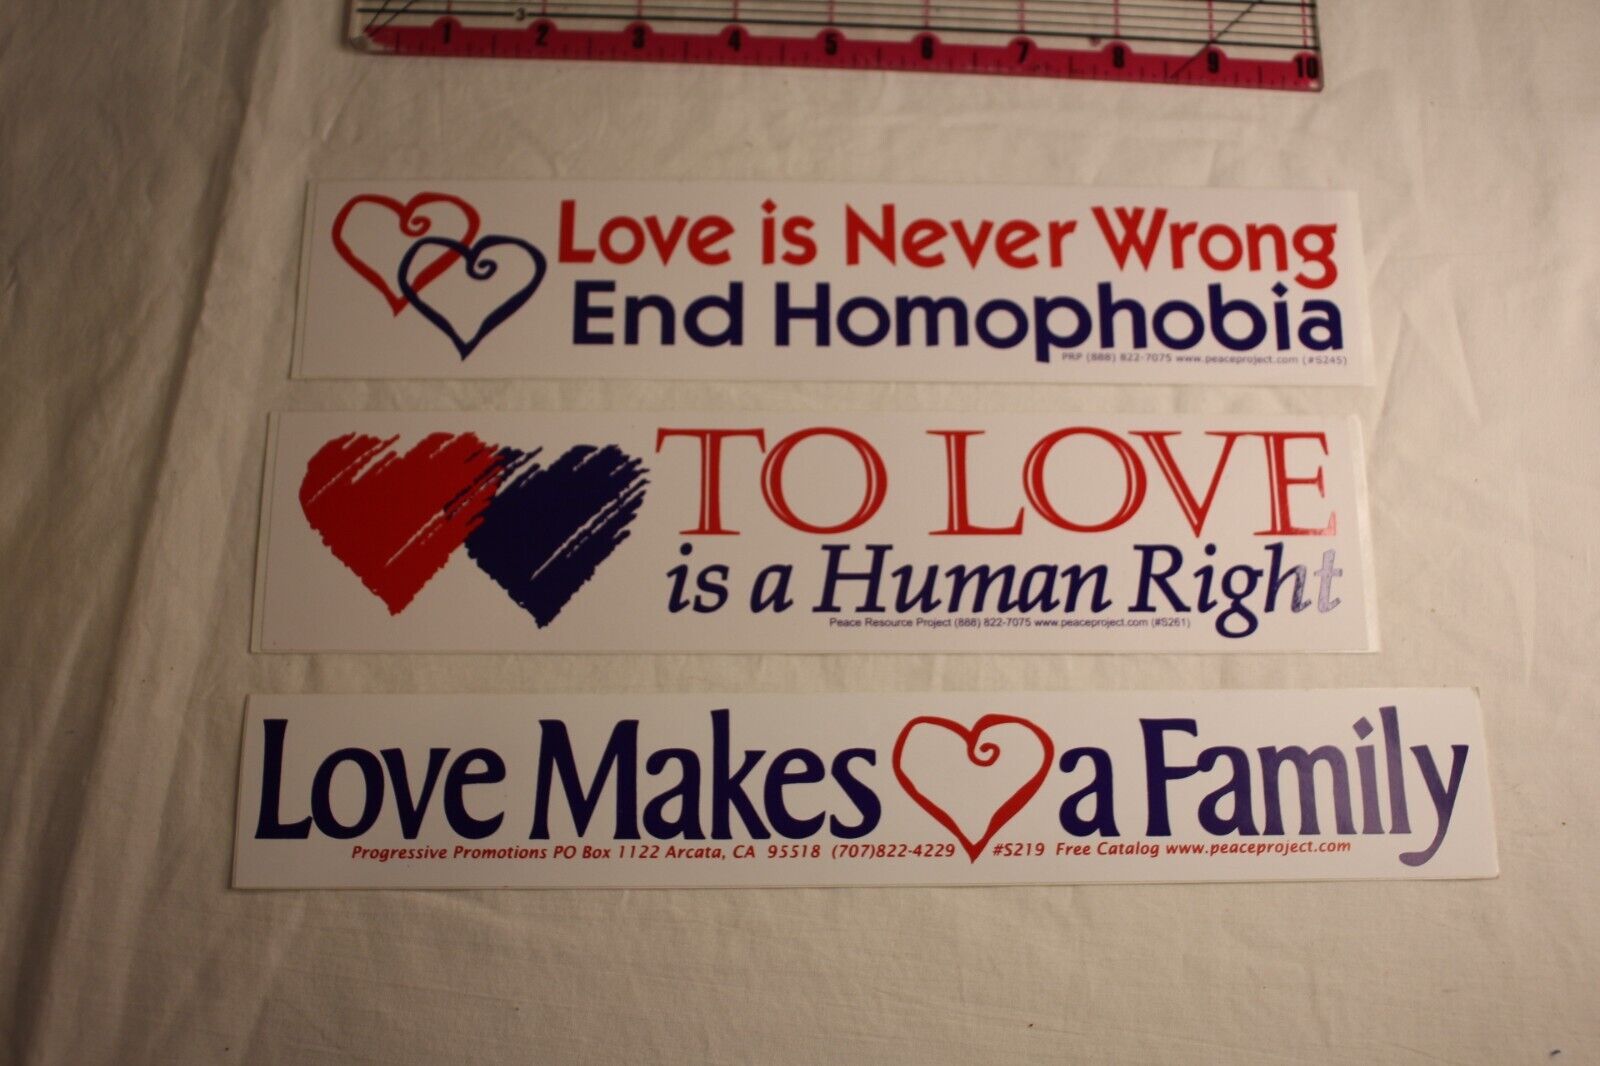 Love Bumper Sticker lot of 3 to love is a human right, end homophobia